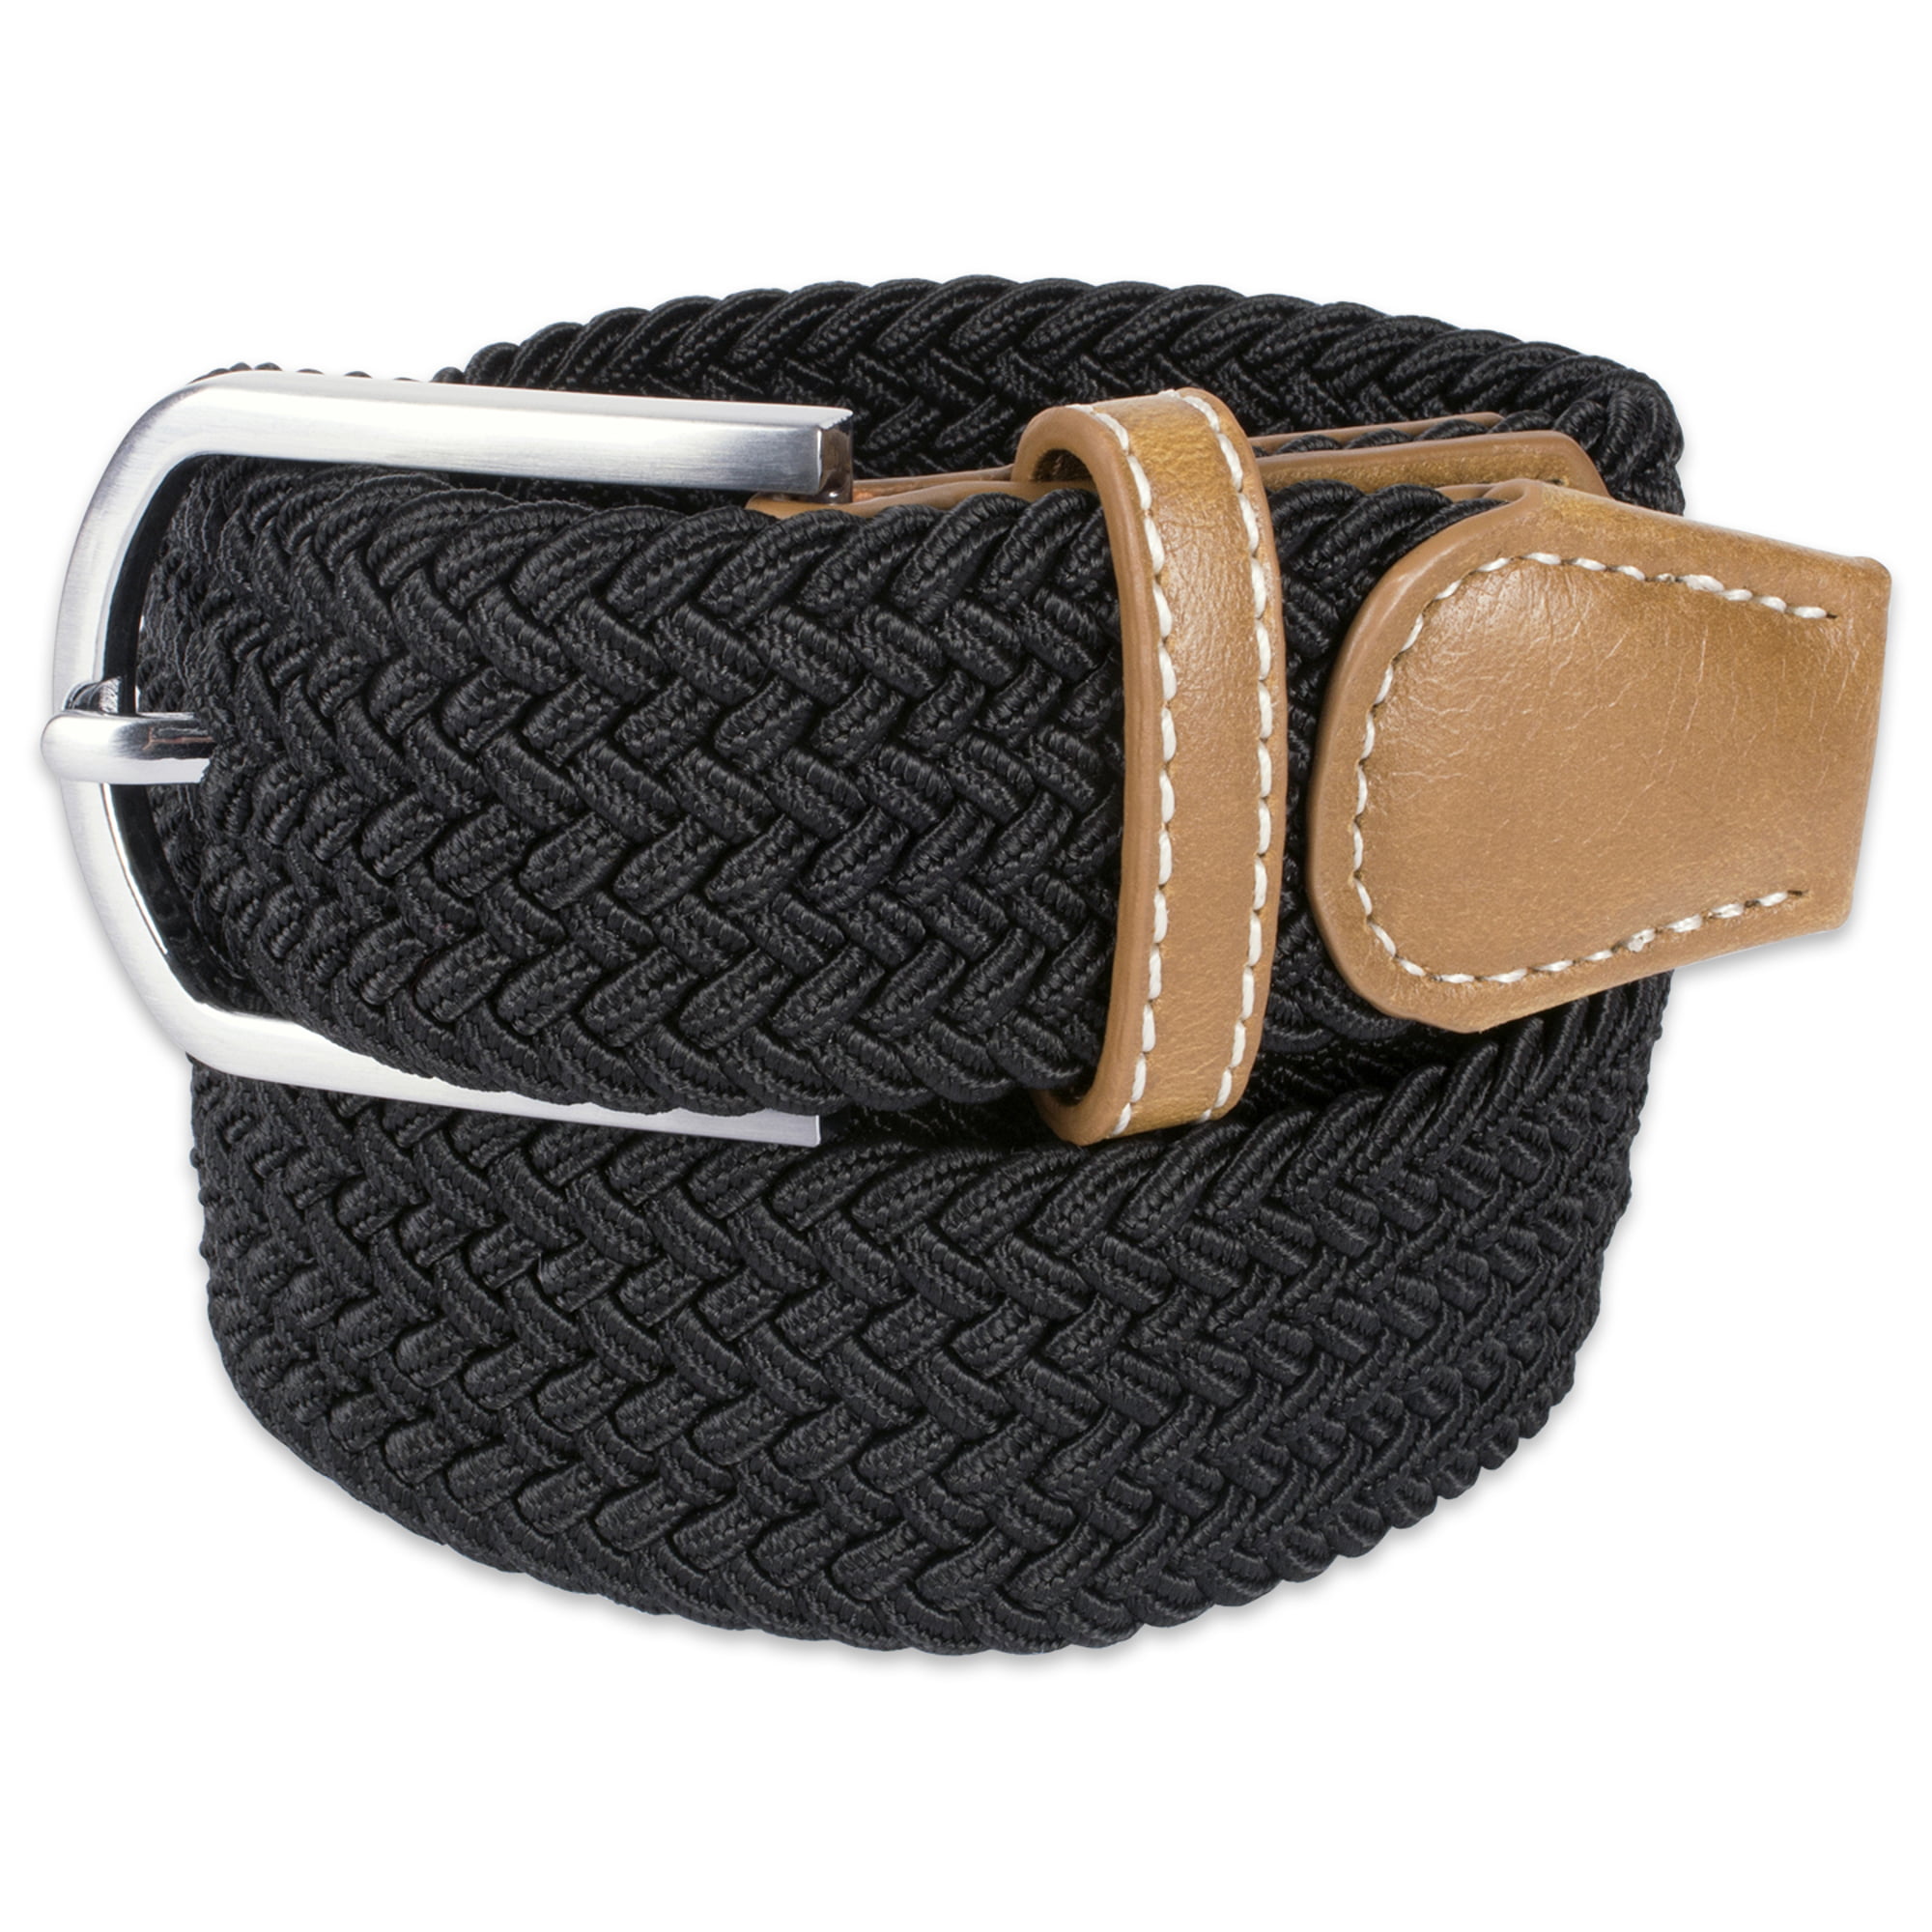 E-Living Store Men's 32mm Woven Expandable Braided Stretch Belts, Black,  Small (Waist Size 30-32) 